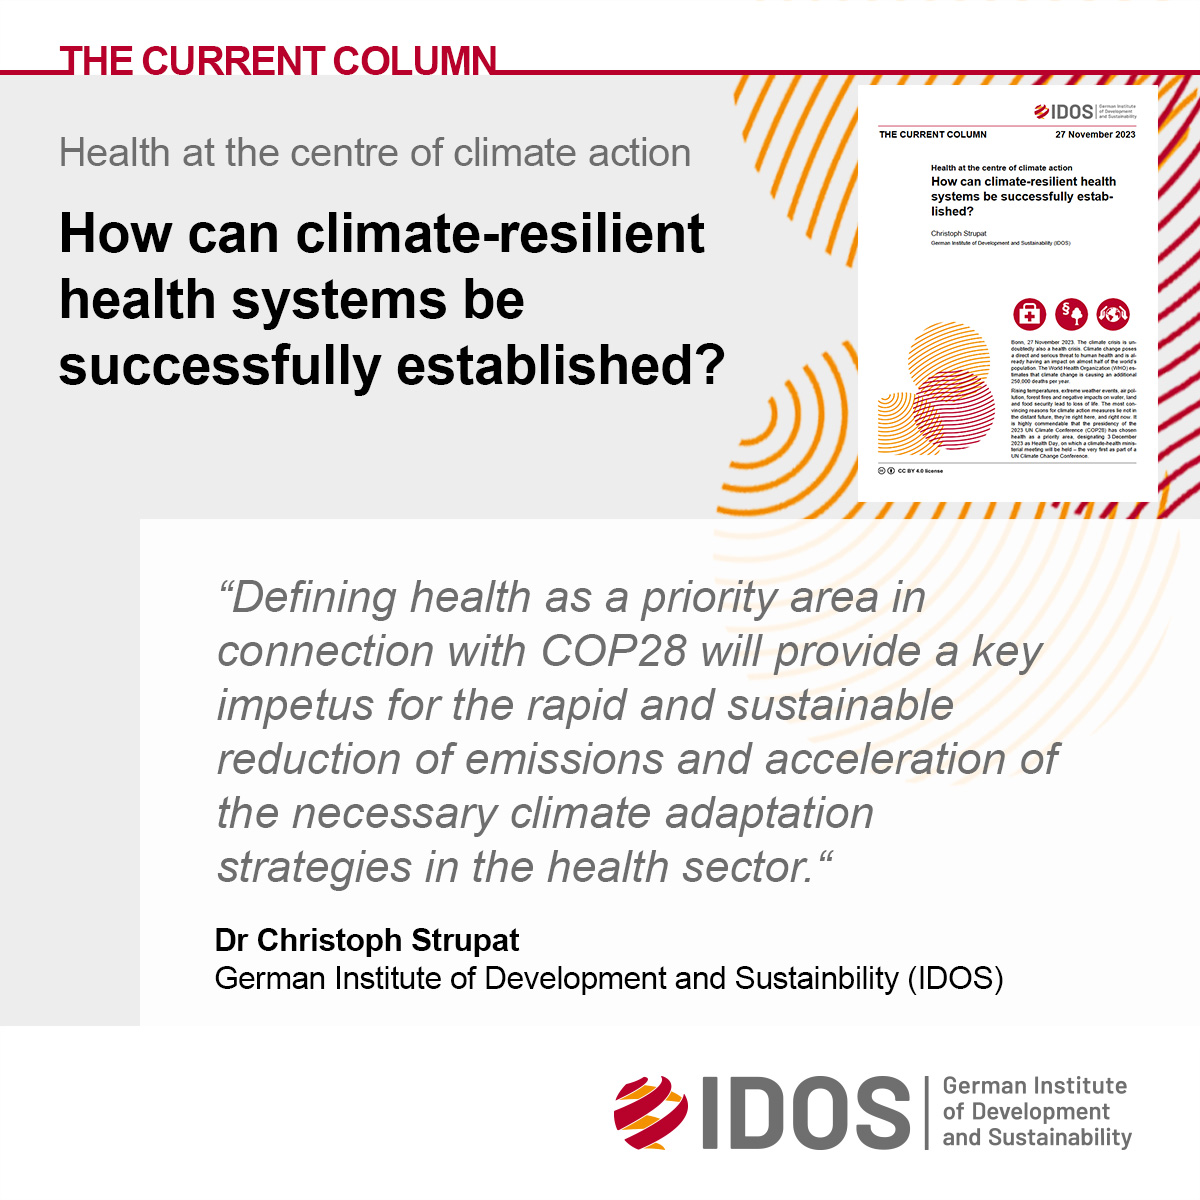 The #ClimateCrisis is also a #HealthCrisis. Climate change poses a direct and serious threat to human health. 💡Ahead of #COP28, @CStrupat reminds in #TheCurrentColumn that the health sector must take on a greater role in climate transformation:🔗idos-research.de/en/the-current…